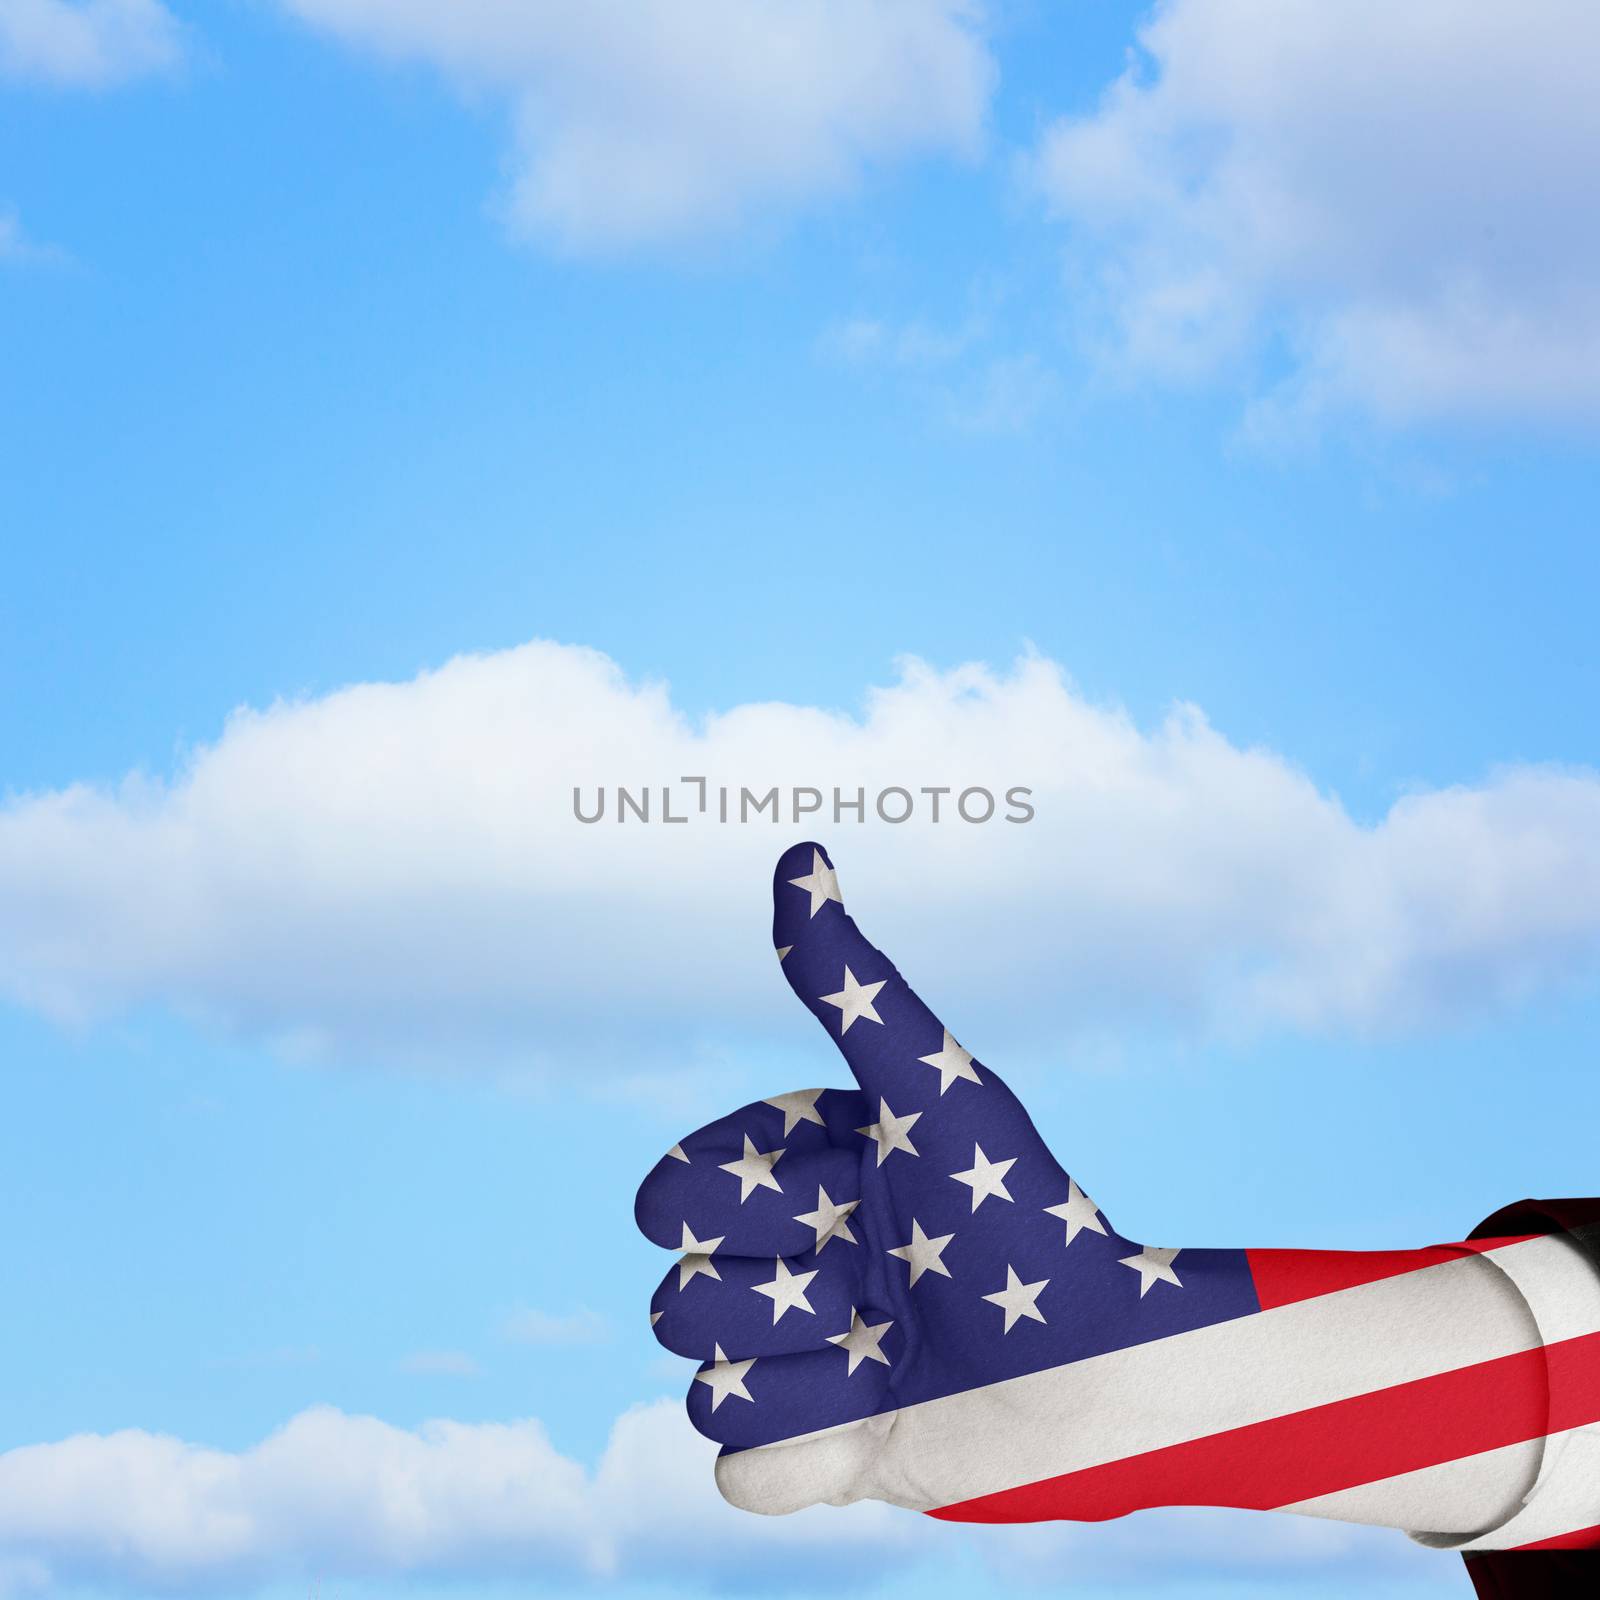 Composite image of hand showing thumbs up by Wavebreakmedia